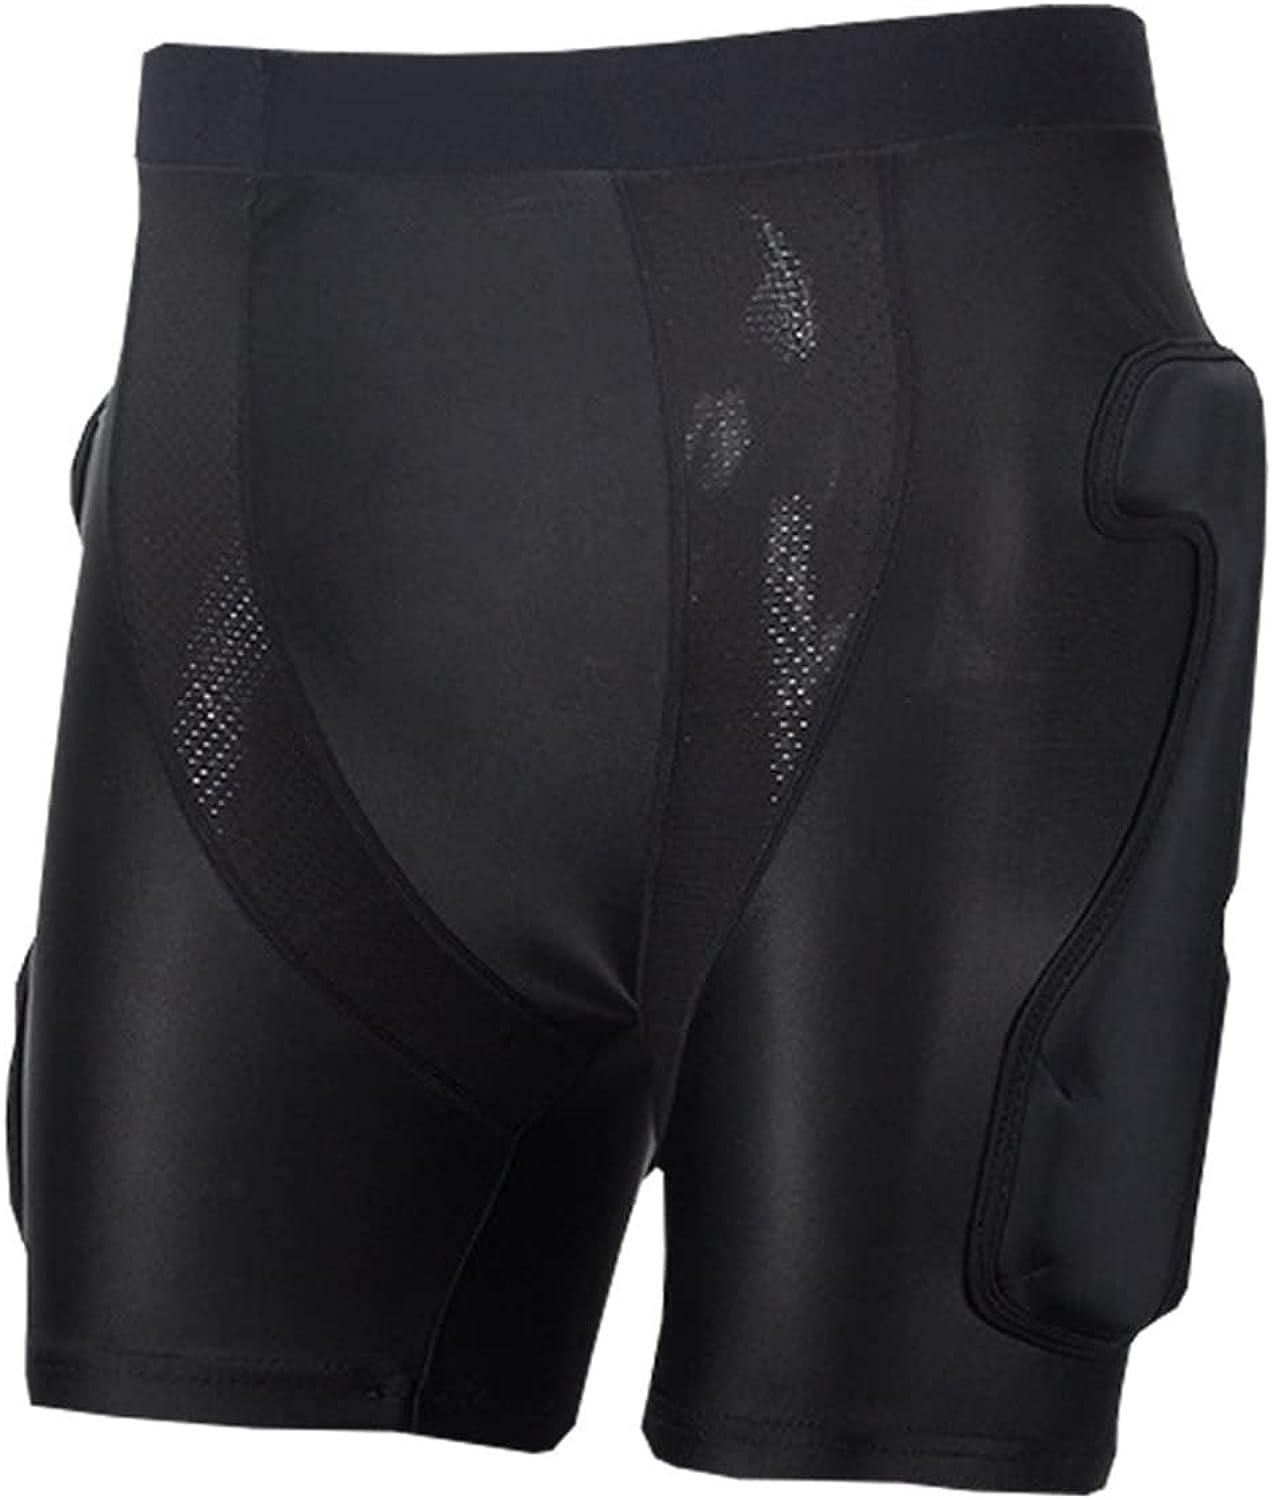 Basketball Pants with Knee Pads 3/4 Compression Leggings Capri Tights